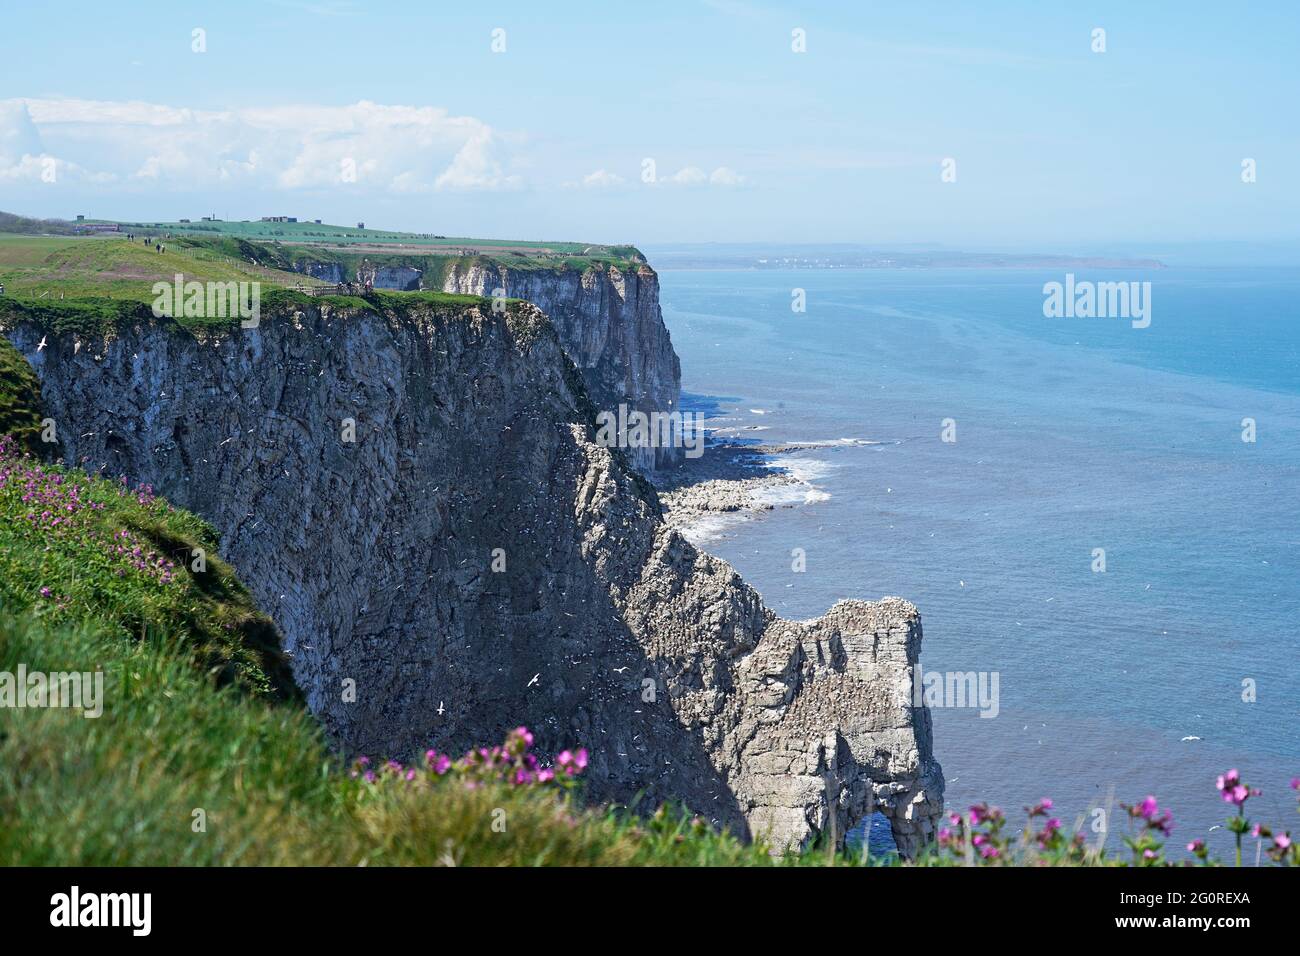 The view of Bempton Cliffs in Yorkshire, England Stock Photo